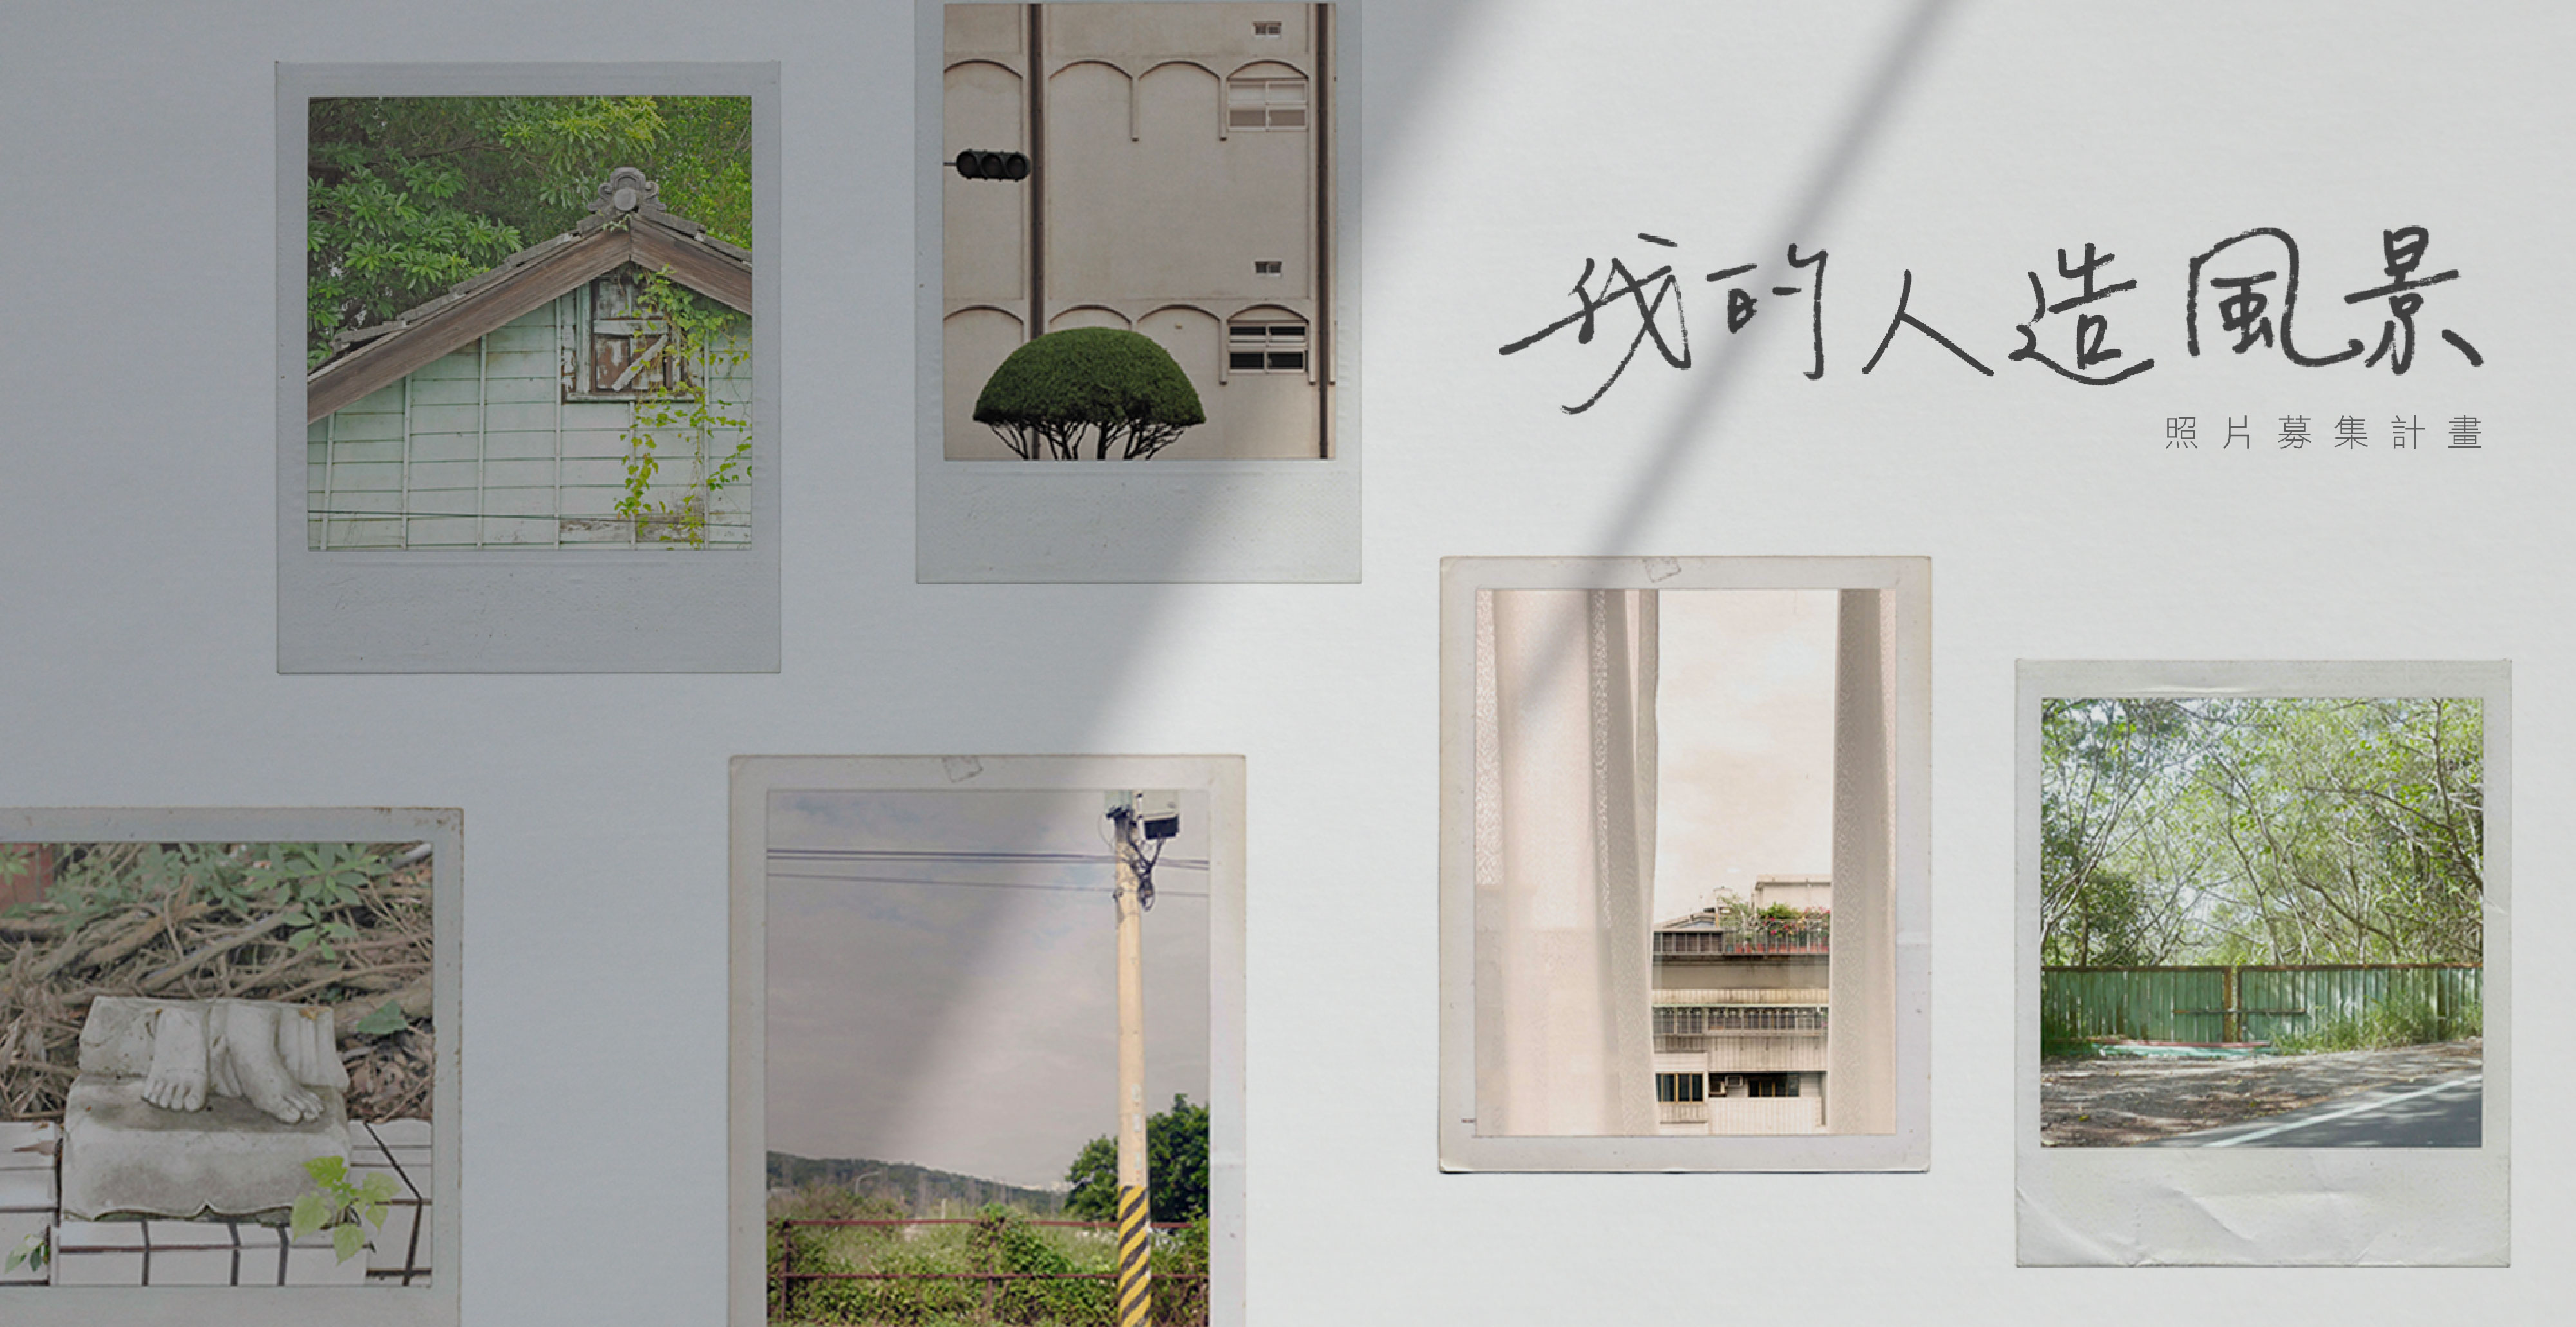 【Photo collection】My artificial landscape